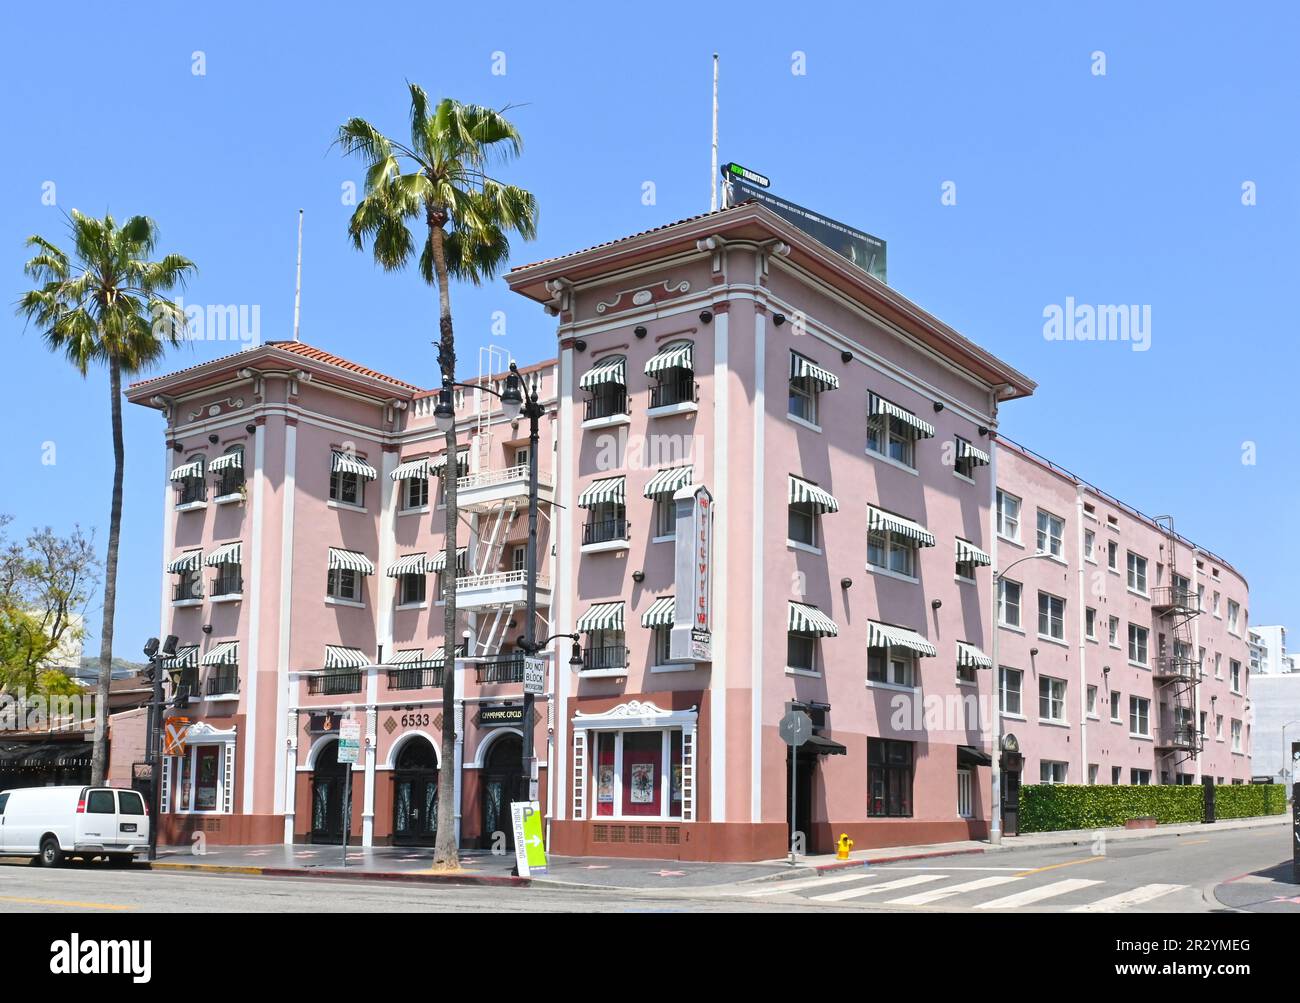 HOLLYWOOD, CALIFORNIA - 11 MAY 2023: The historic Hillview Apartments on Hollywood Boulevard, Built in 1917 to house film stars of the day. Stock Photo